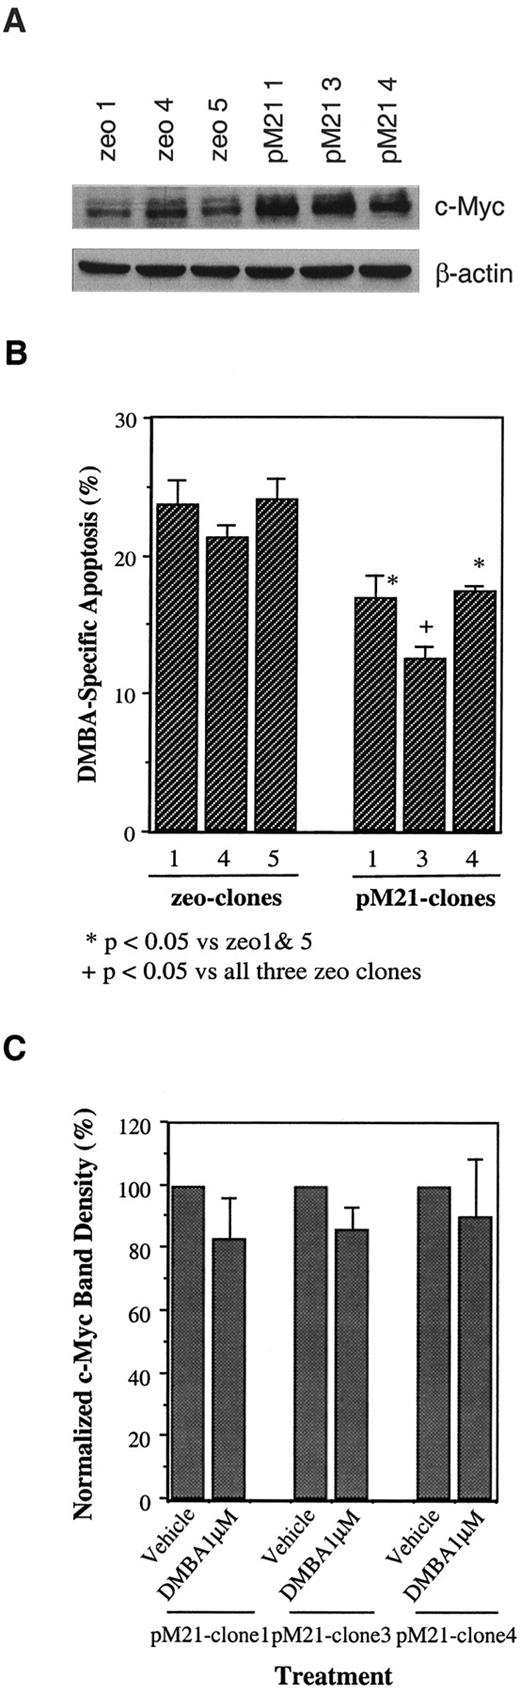 FIGURE 4. Ectopic expression of c-Myc protects pro/pre-B cells from DMBA-induced apoptosis. A, BU-11 cell subclones stably transfected with the pM21-c-myc expression plasmid and pEF4-zeocin or with the pEF4-zeocin plasmid alone were maintained on pEF4-zeocin-transfected BMS2 stromal cells. Three randomly chosen pM21-c-myc and three control pEF4-zeocin-transfected clones were lysed, total protein was extracted, and 30 μg was loaded into SDS-polyacrylamide gels for c-Myc-specific immunoblotting. Blots were stripped and reprobed for β-actin expression to control for protein loading errors. Representative data from one of three experiments are shown. B, Stable pM21-c-myc or pEF4-zeocin-transfected BU-11 subclones were treated with vehicle or 1 μM DMBA for 24 h, and the percentage of apoptotic cells was assessed by PI staining and flow cytometry. Background levels of apoptosis observed in vehicle-treated sublines transfected with pEF4-zeocin alone or with pM21-c-myc plus pEF4-zeocin (averaging 7 ± 1% for both groups) were subtracted from the percentage of apoptosis observed in the respective DMBA-treated subclones. The data are presented as the average percentage of DMBA-specific apoptosis ± SE from five experiments. Statistical significance was determined using one-way ANOVA and the Duncan’s test. ∗, A significant reduction in the percentage of apoptotic cells as compared with apoptosis observed in either pEF4-zeocin-transfected clone 1 or pEF4-zeocin-transfected clone 5, p < 0.05. +, A significant reduction in the percentage of apoptotic cells as compared with any of the pEF4-zeocin-transfected subclones, p < 0.05. The average percent reduction in the three pM21-c-myc-transfected clones relative to the three control clones was 30 ± 3%; p < 0.01. C, Stable pM21-c-myc-transfected BU-11 subclones were treated with vehicle or 1 μM DMBA for 24 h. Cells were lysed, total proteins were extracted, and 30 μg was loaded into SDS-polyacrylamide gels for c-Myc-specific immunoblotting. Blots were stripped and reprobed with β-actin-specific Ab to control for loading errors. Normalized c-Myc band densities were compared with c-Myc levels in vehicle-treated pM21-c-myc-transfected BU-11 subclones. Data are presented as the average percentage of c-Myc protein ± SE from six experiments. Statistical significance was determined with the paired t test. There were no significant decreases in c-Myc expression in any of the DMBA-treated clones, and statistical significance was not reached even when data from all three DMBA-treated clones were pooled (n = 18; p = 0.41).